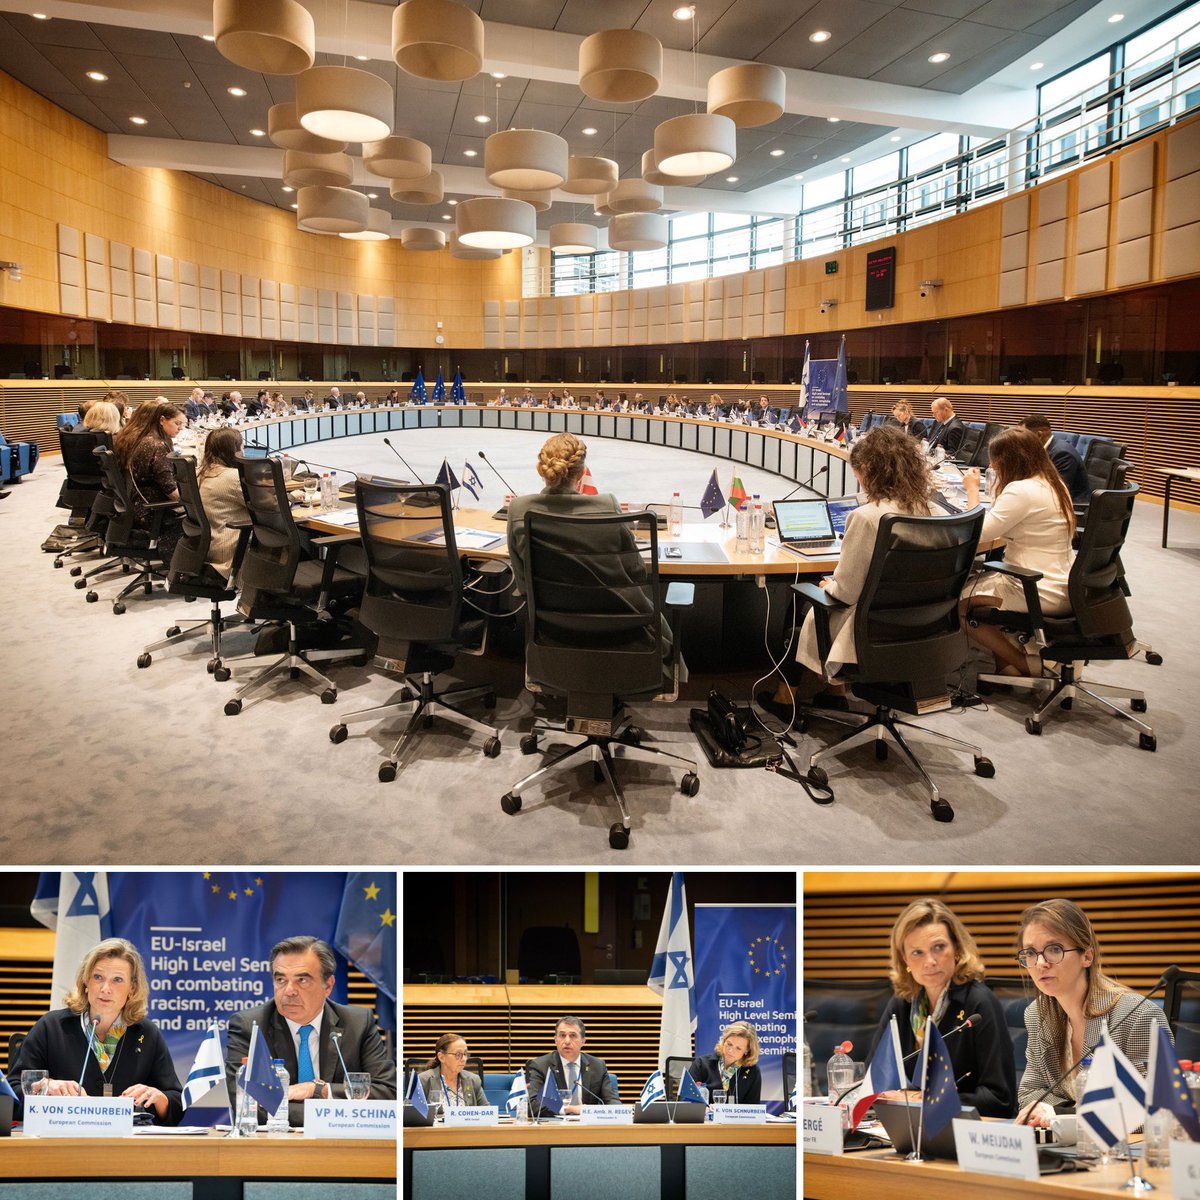 Thanks to @auroreberge for her clear words. Fruitful discussion with Israeli and EU-based experts about the effect of 7/10 on #Jewish communities, #democracy and #security in Europe, effective education tools and addressing #radicalisation and dangerous content online.